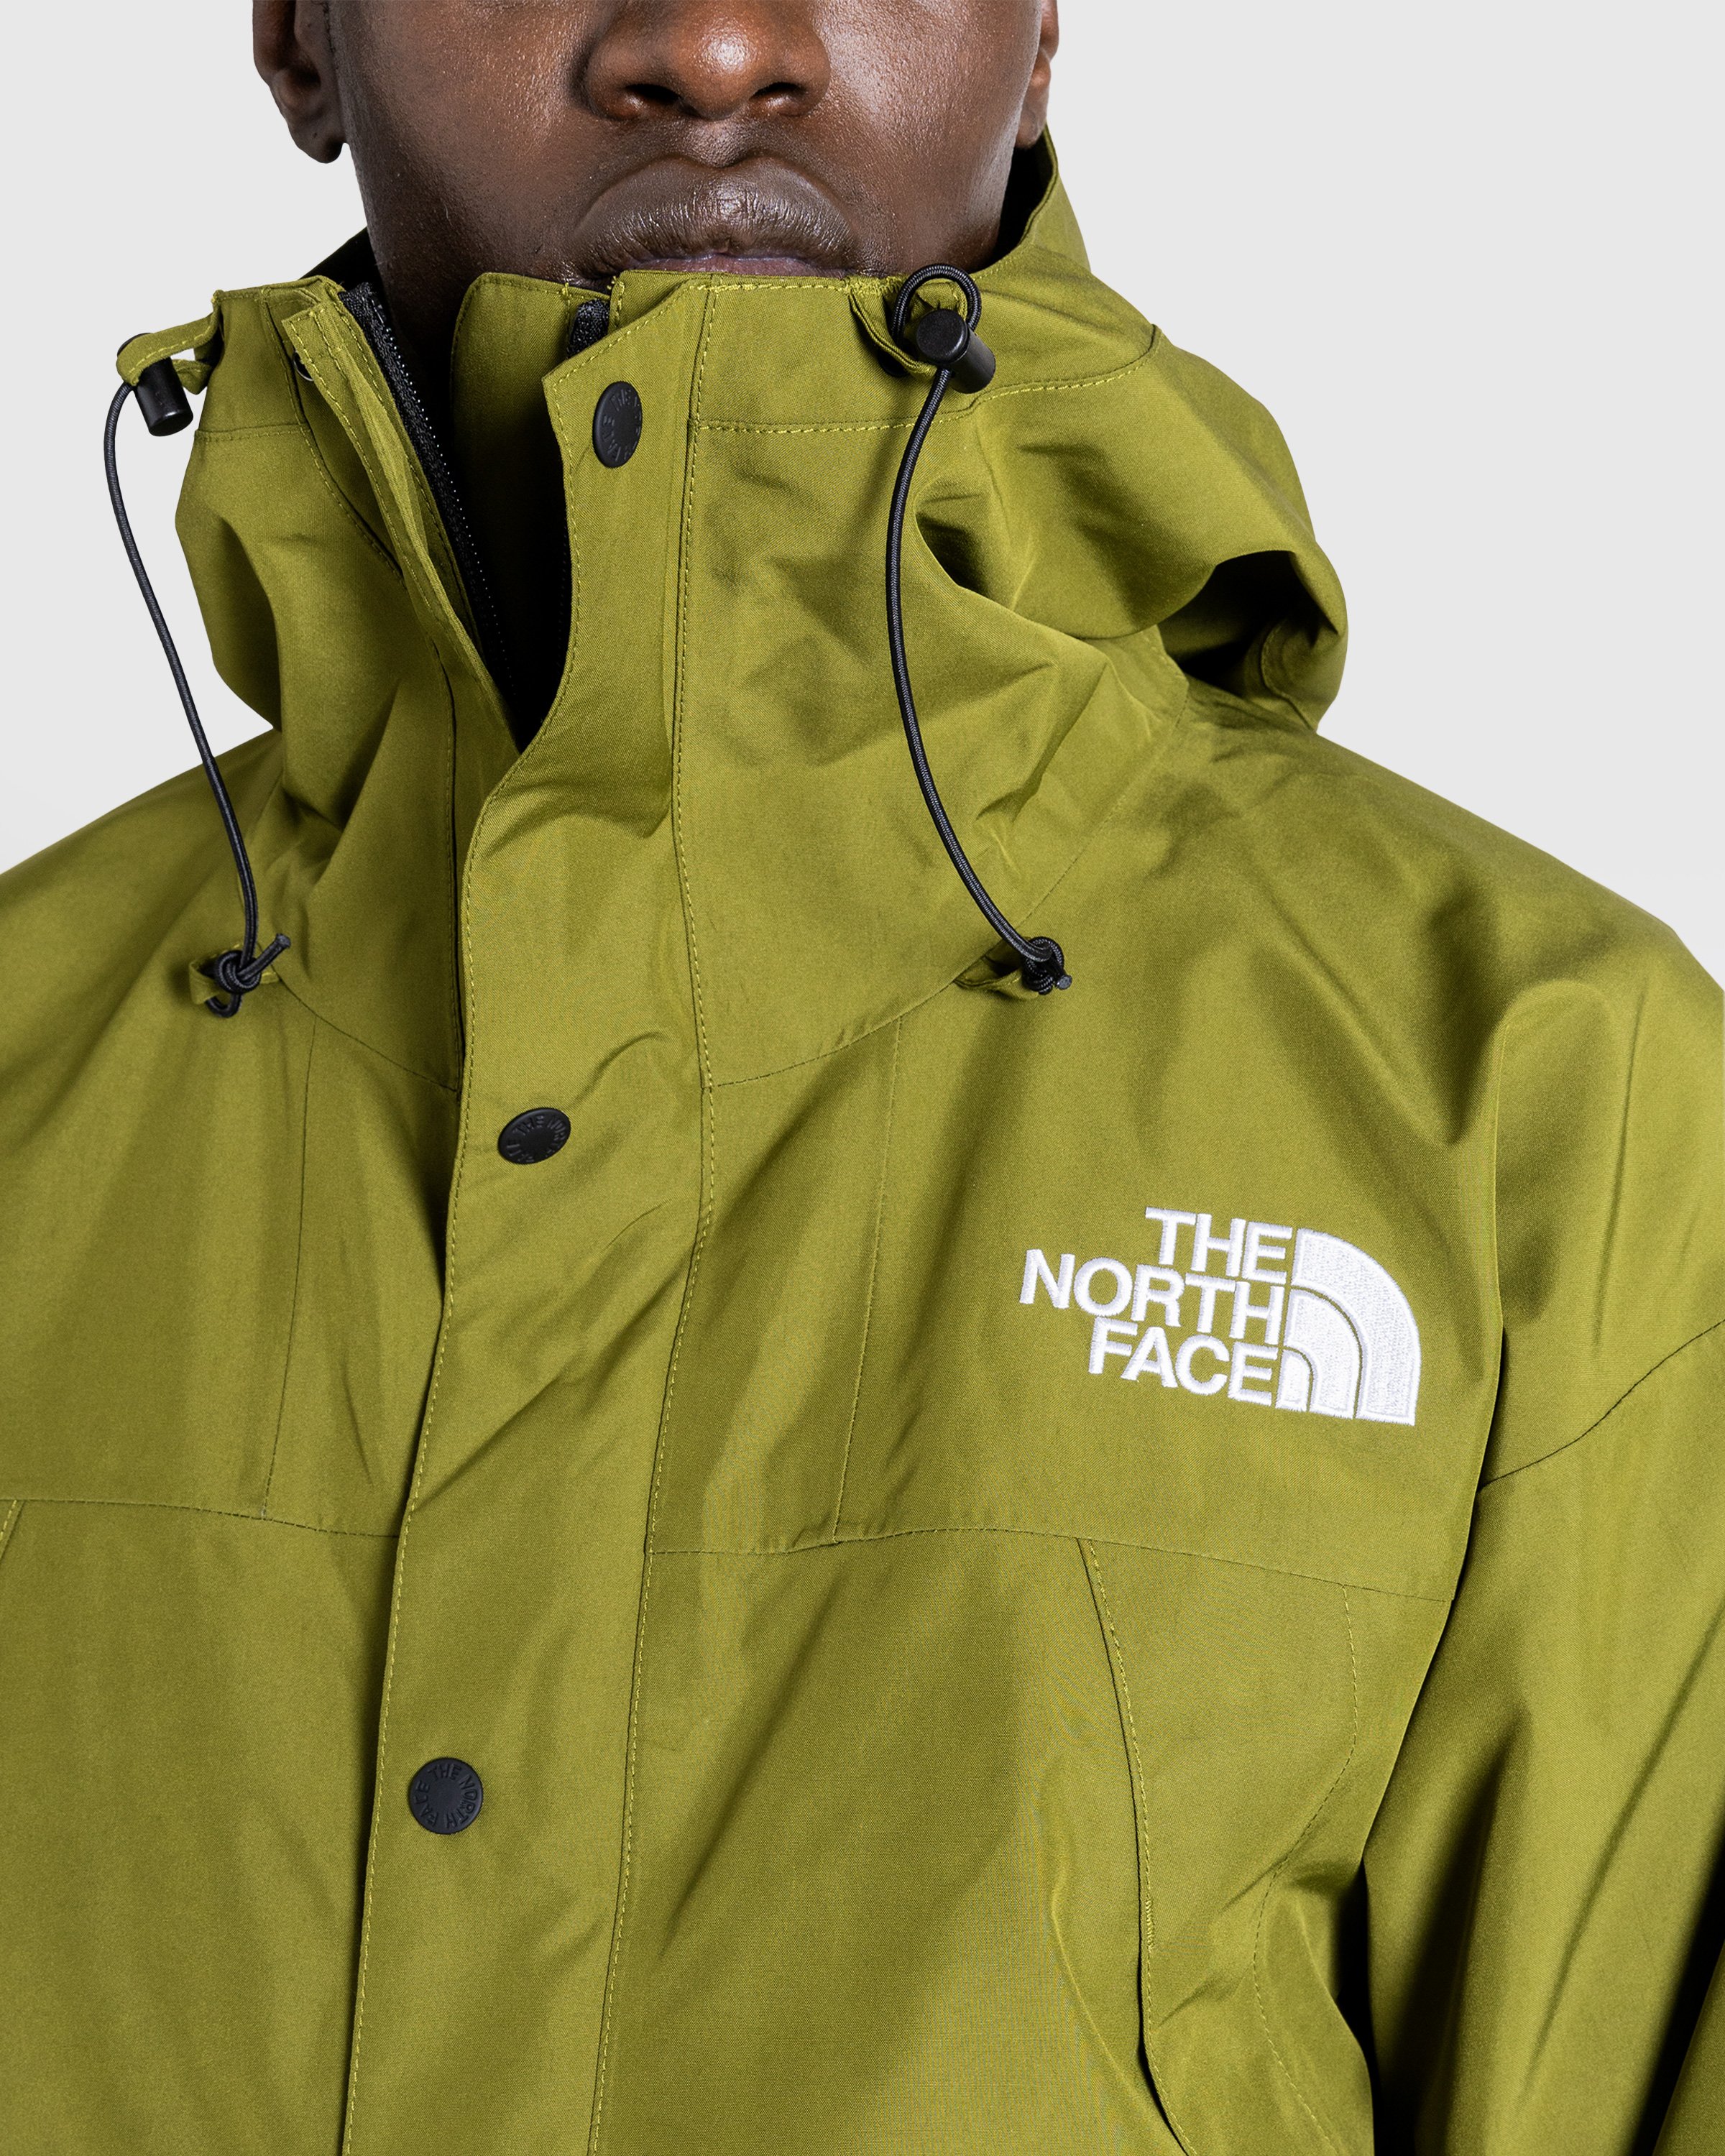 The North Face – GORE-TEX Mountain Jacket Forest Olive | Highsnobiety Shop